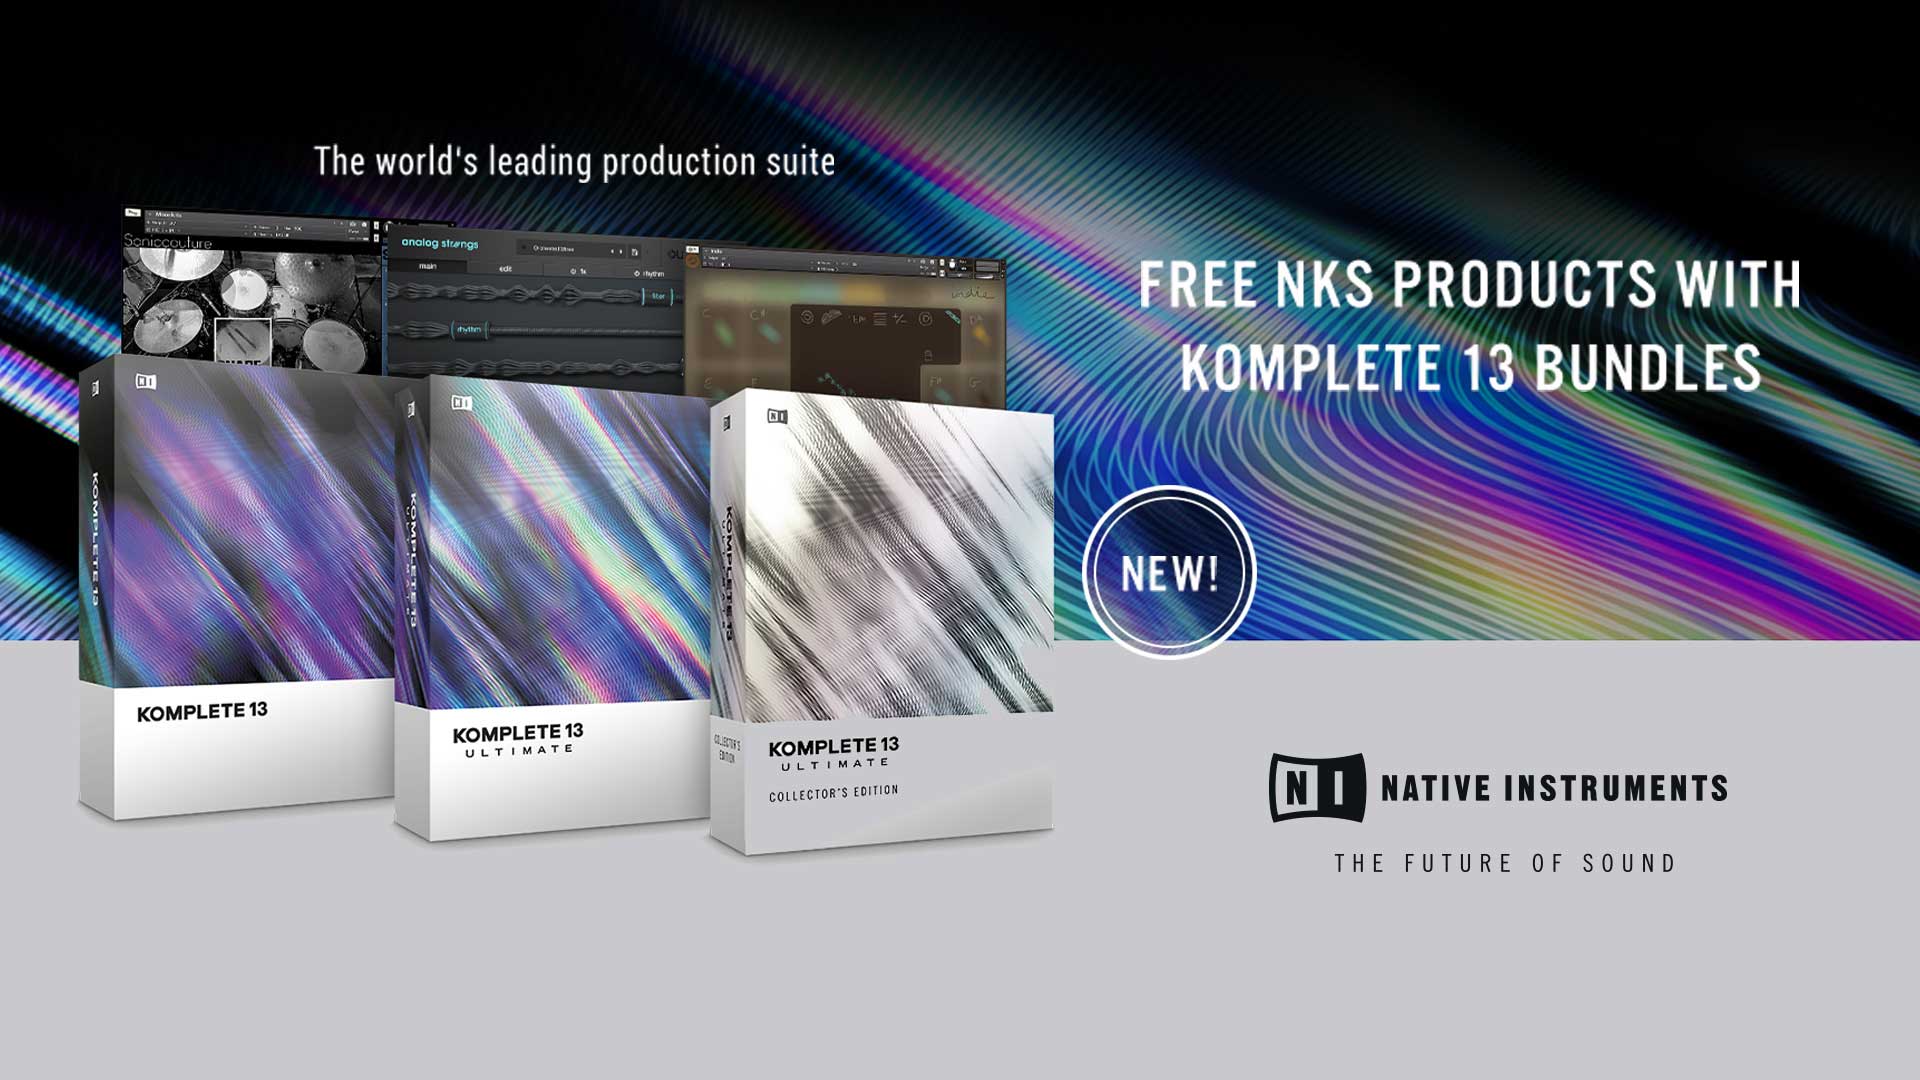 Native Instruments offers FREE NKS product with Native Instruments Komplete 13